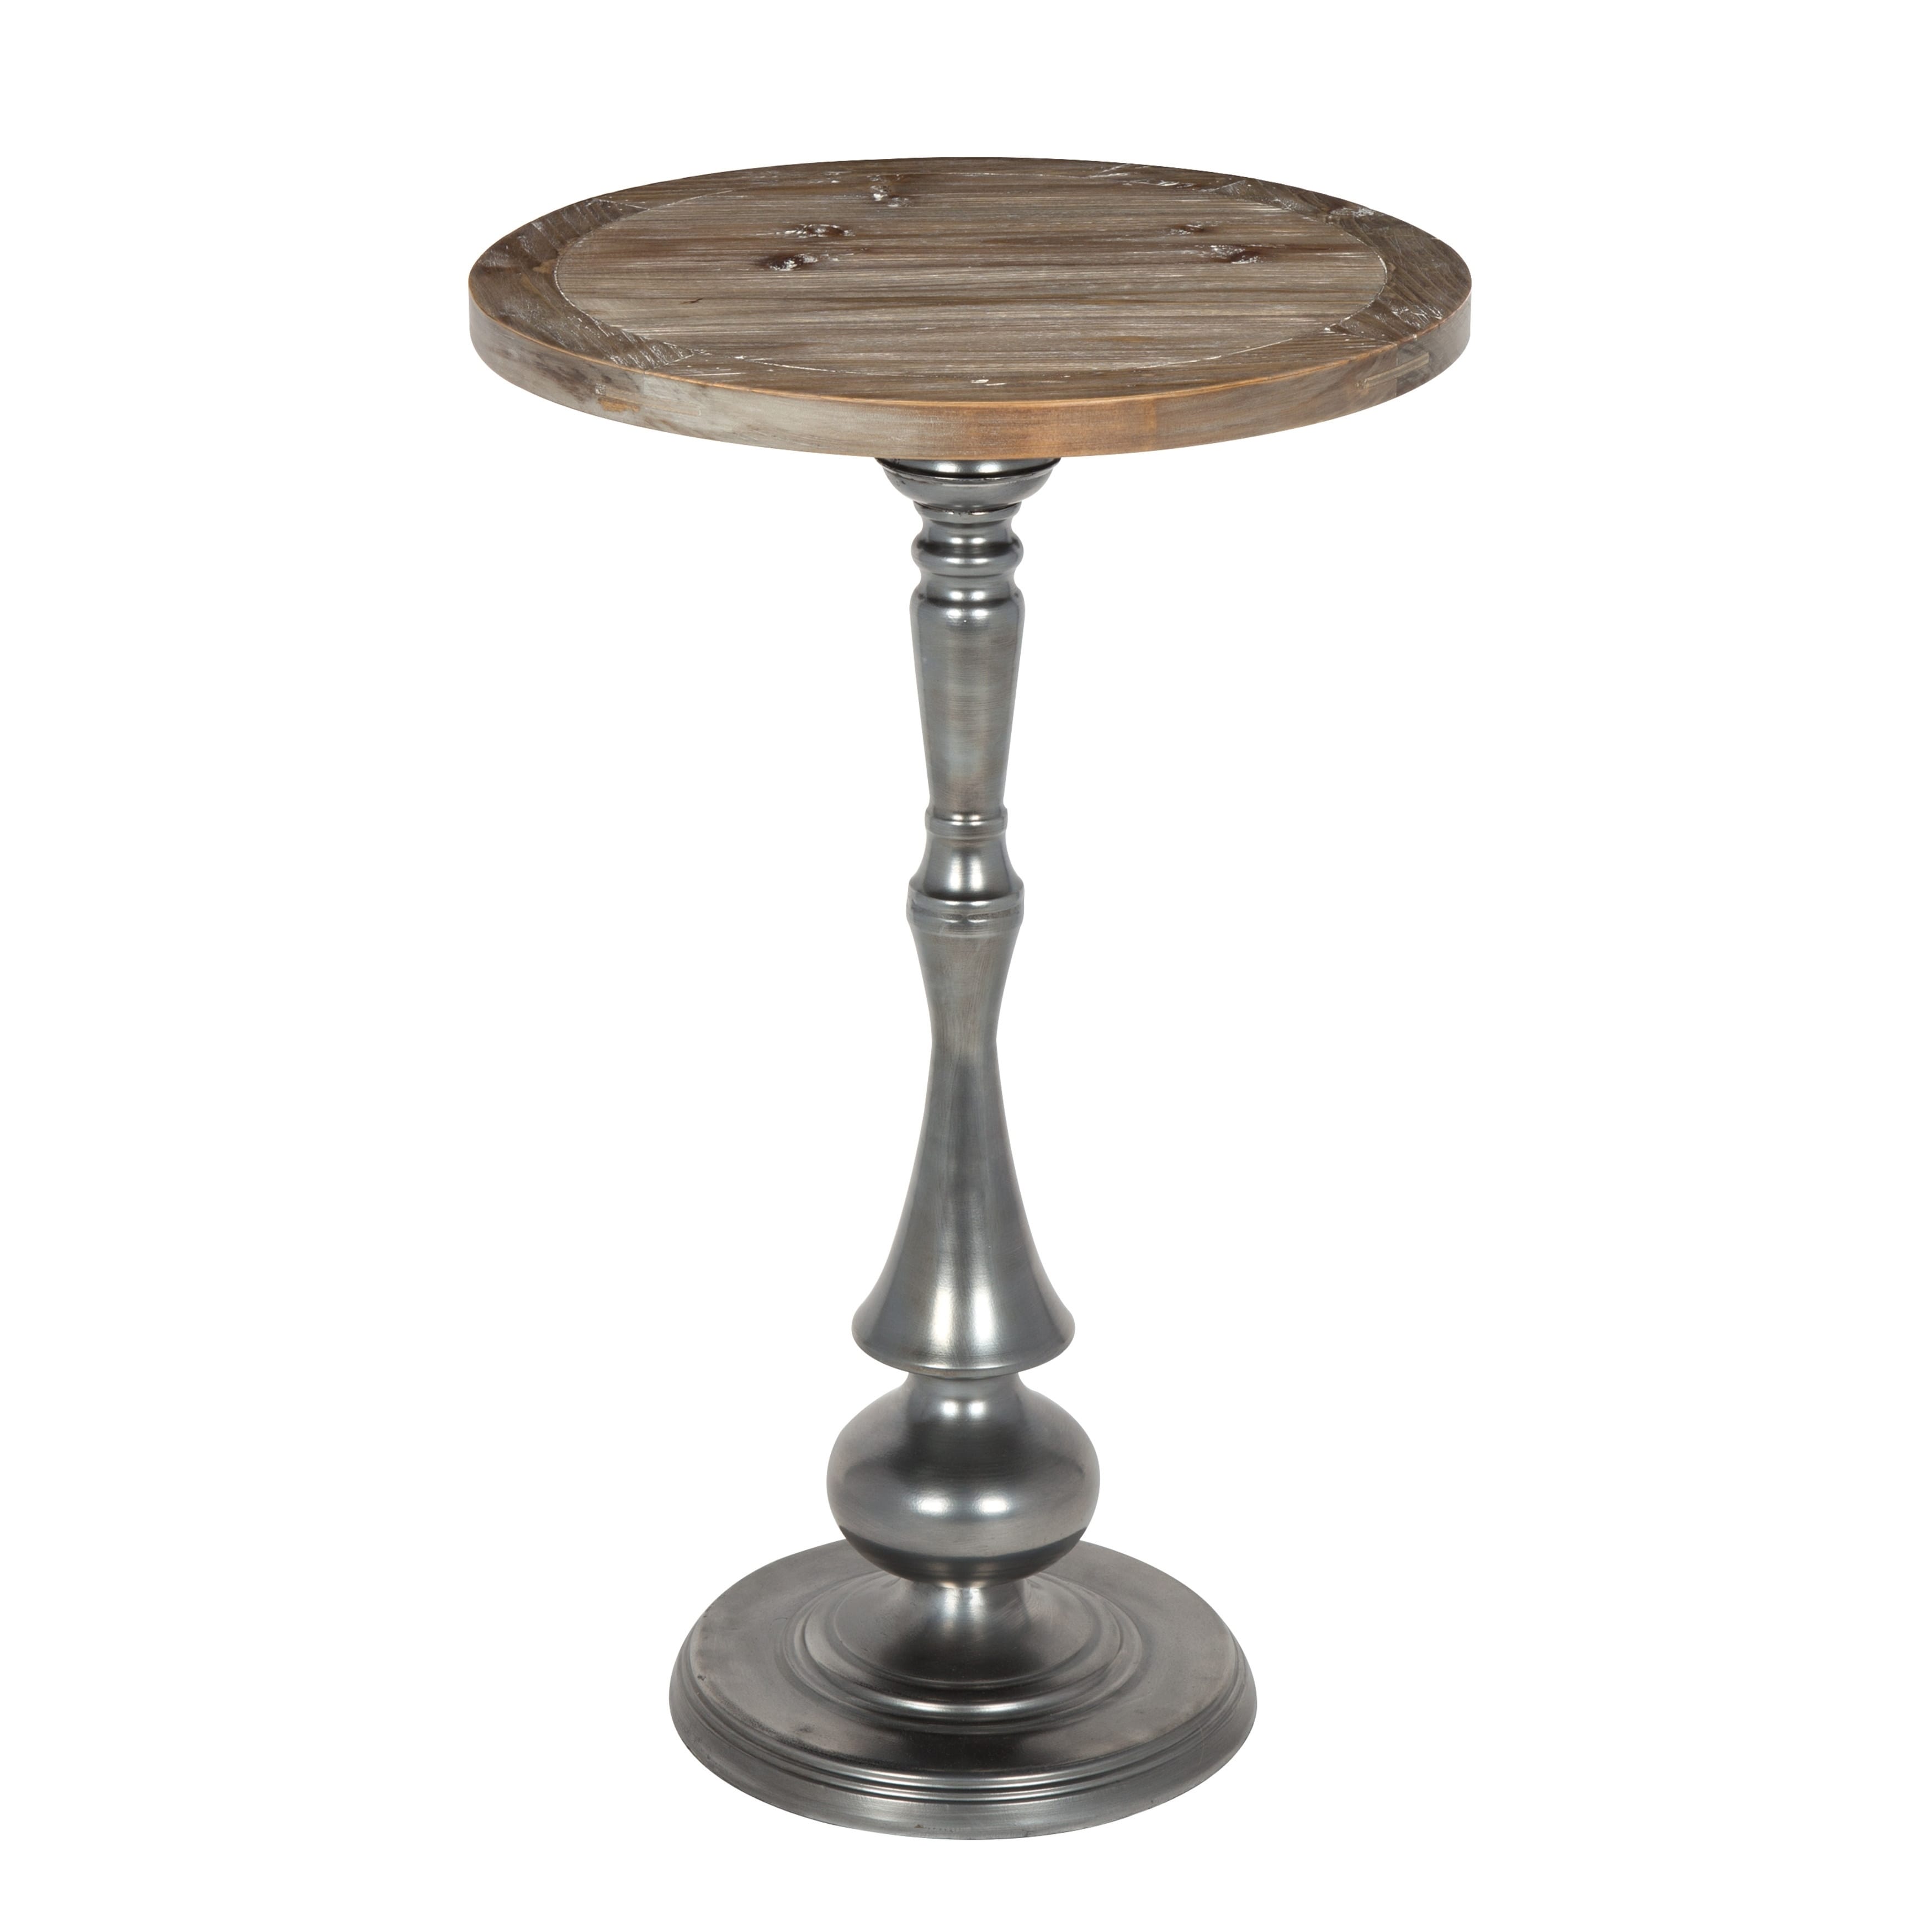 kate and laurel regina round metal wood pedestal accent table silver end tables free shipping today standard folding size rectangle tablecloth sizes tall bedside with drawers